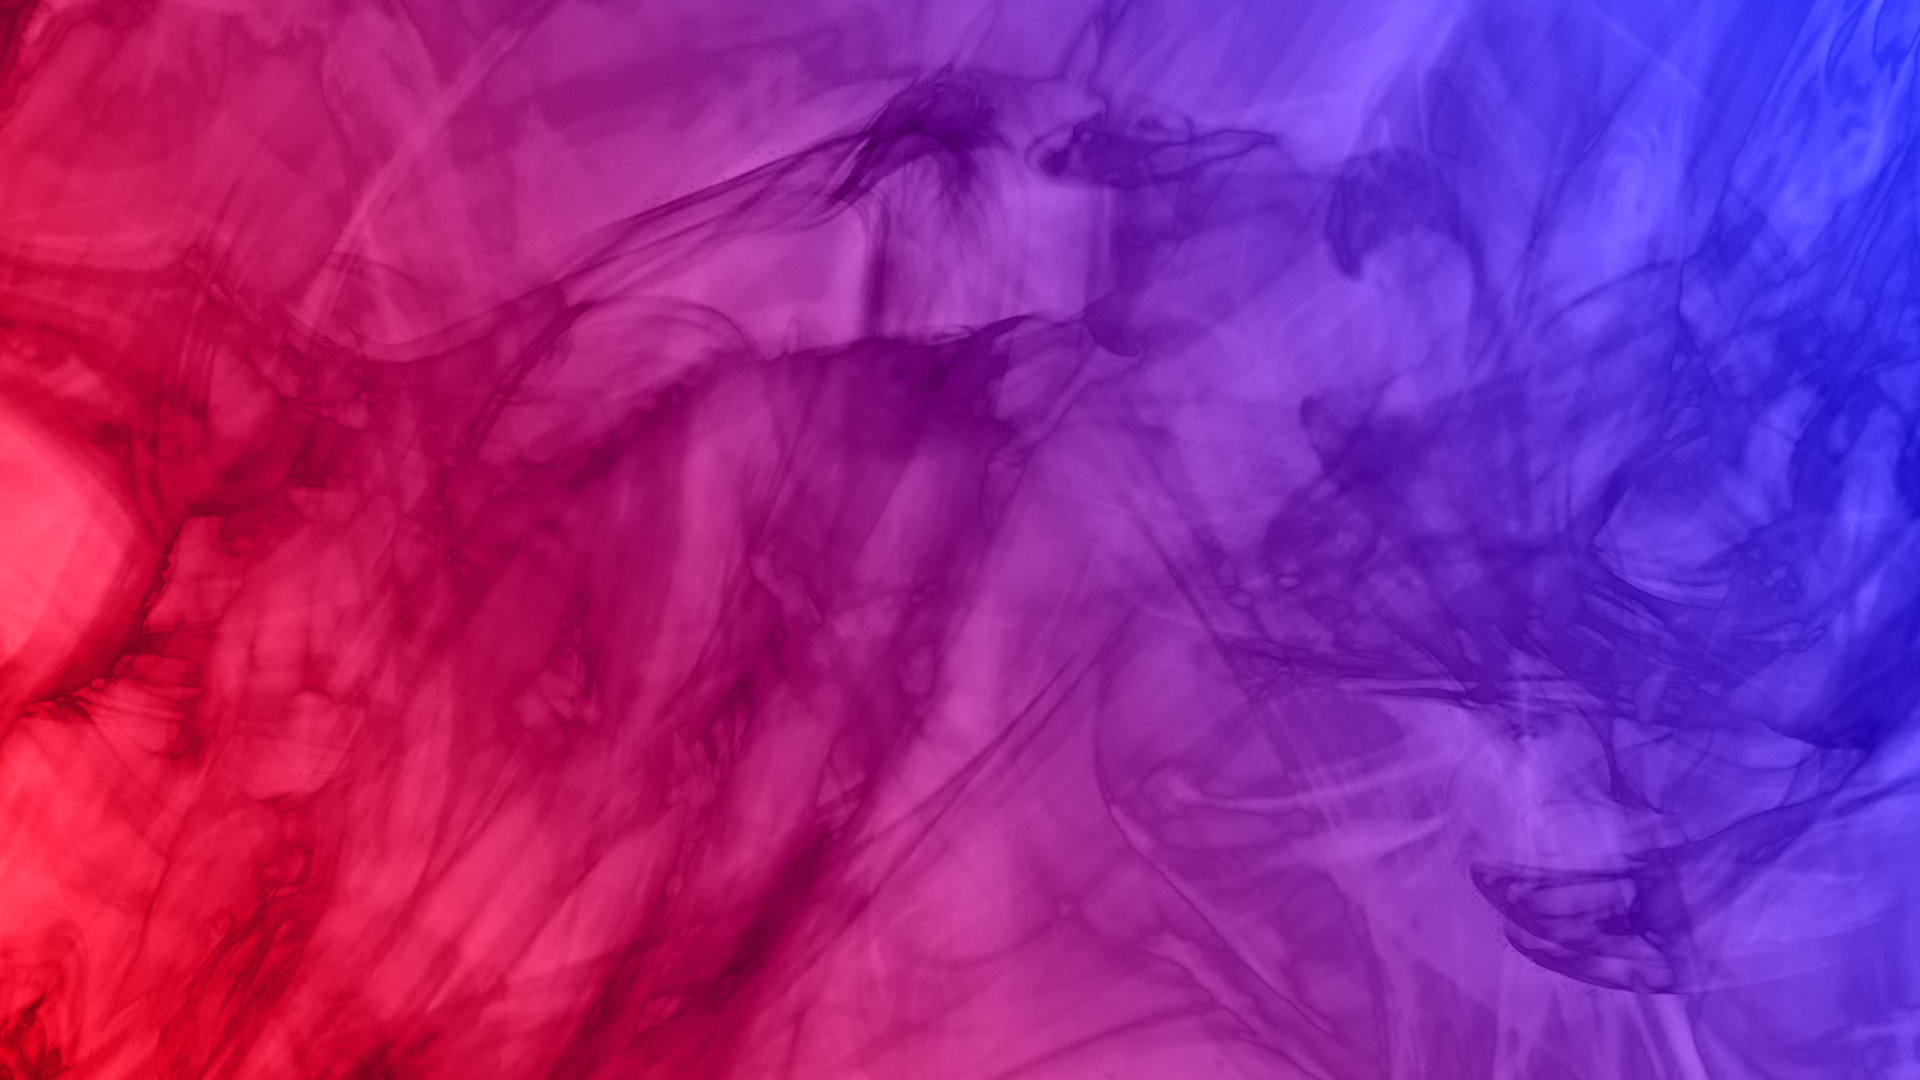 Marble Fade fire and ice wallpaper., GlobalOffensive. Android wallpaper blue, Dark red wallpaper, Purple ombre wallpaper